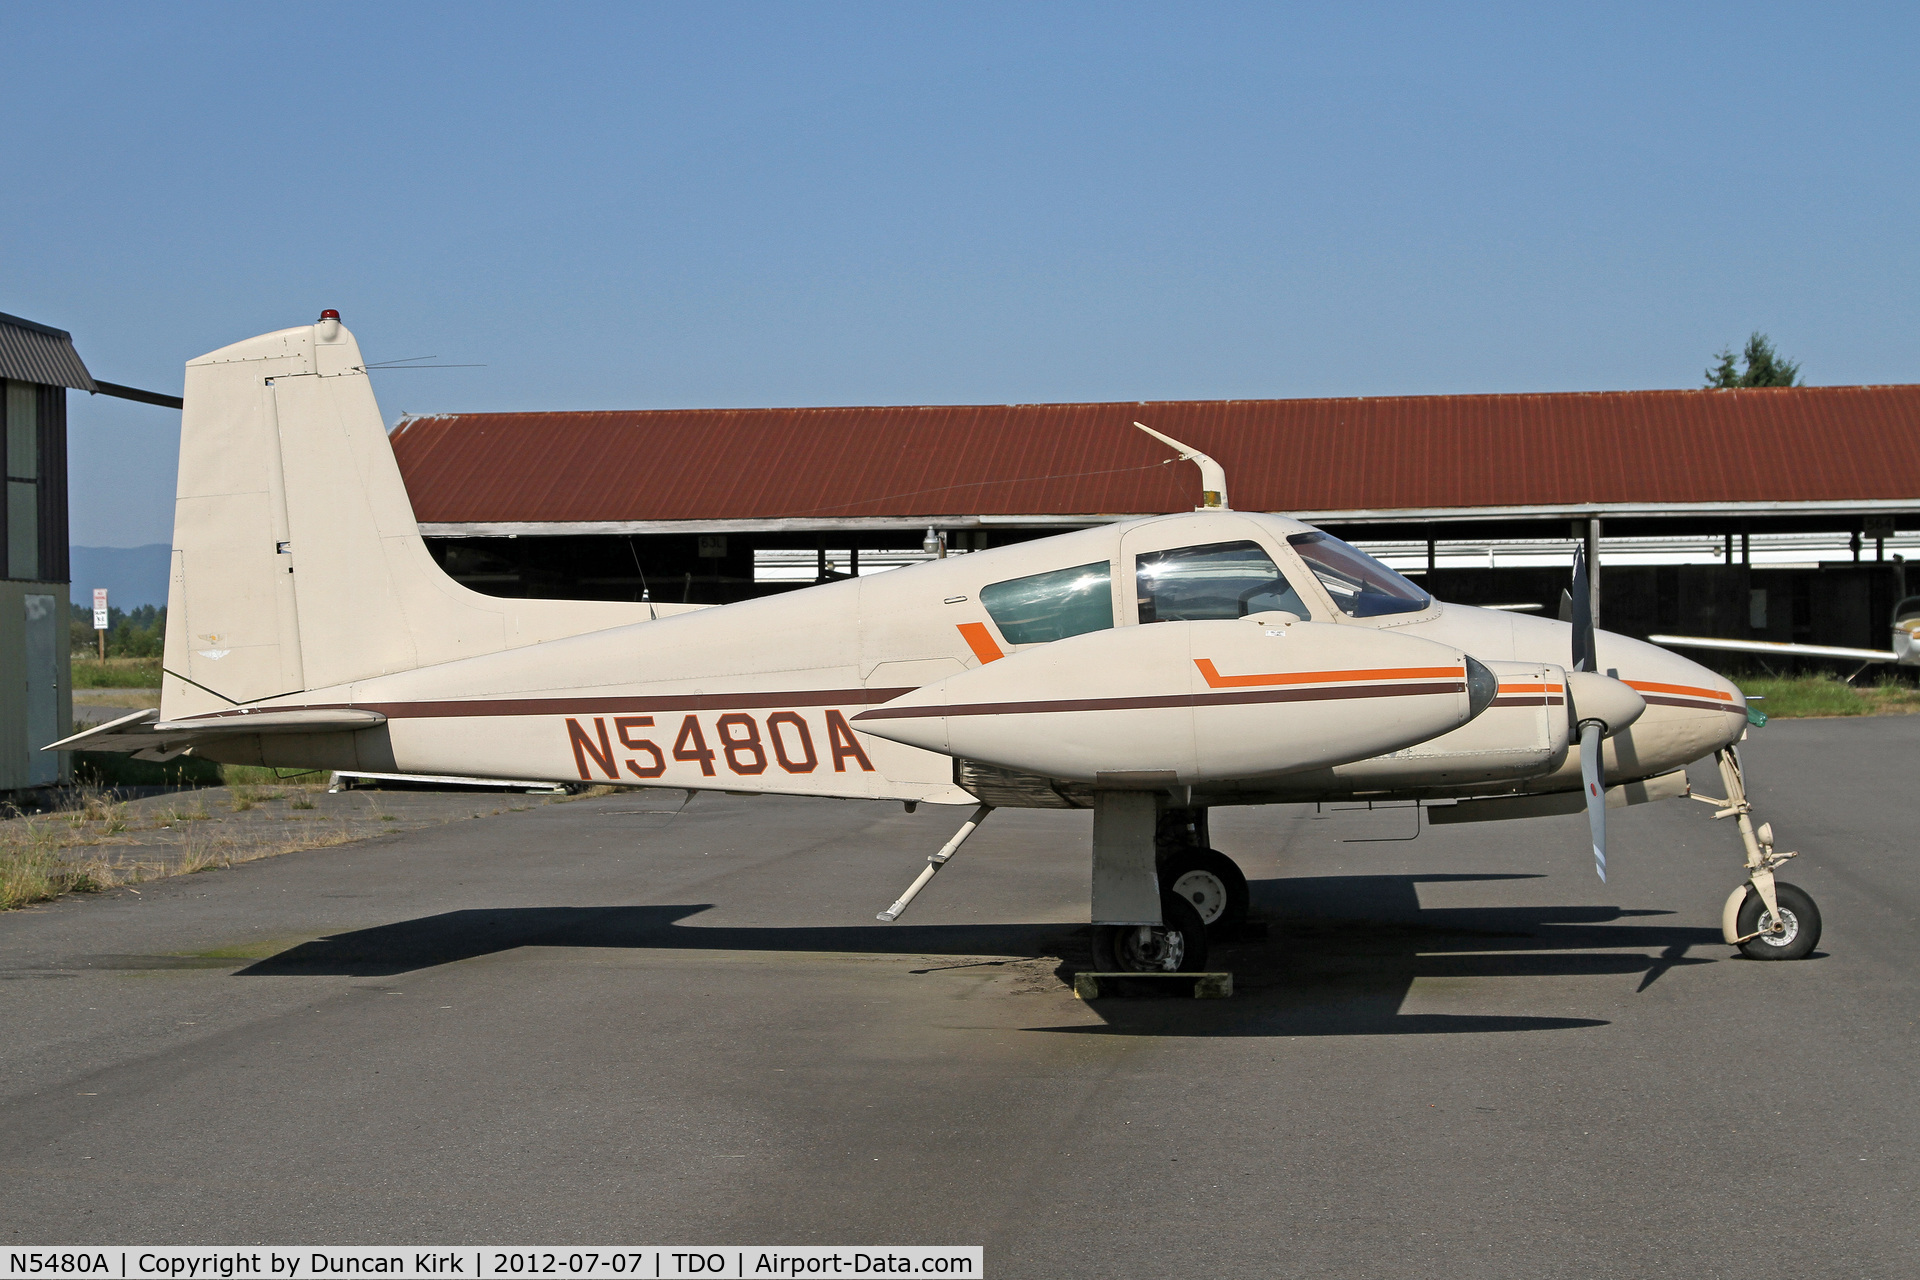 N5480A, 1958 Cessna 310B C/N 35680, This 310 looks in much better shape than last seen at Toledo